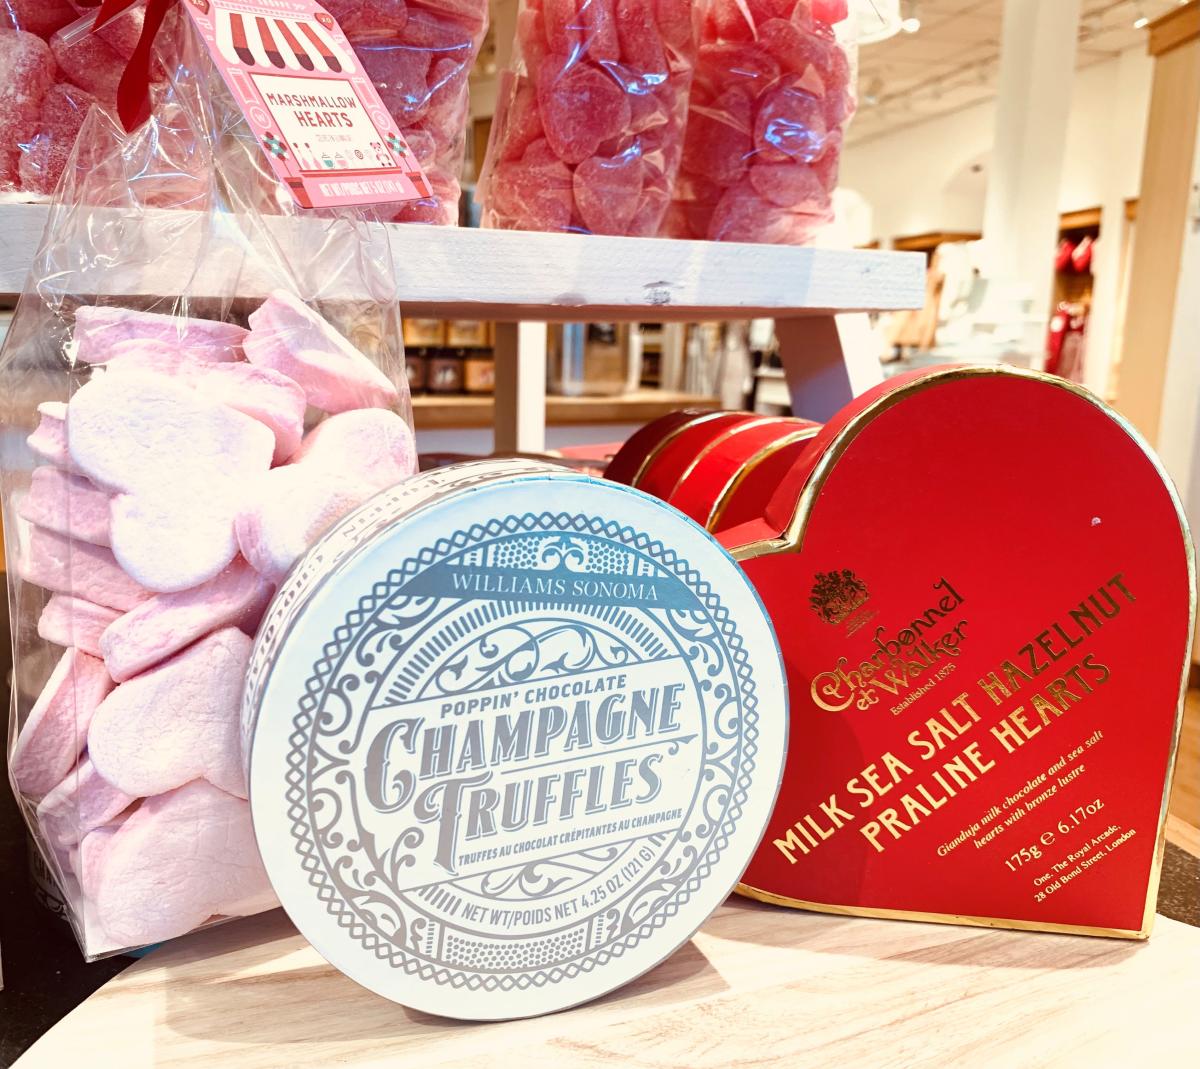 Valentine's Day gifts from Williams Sonoma